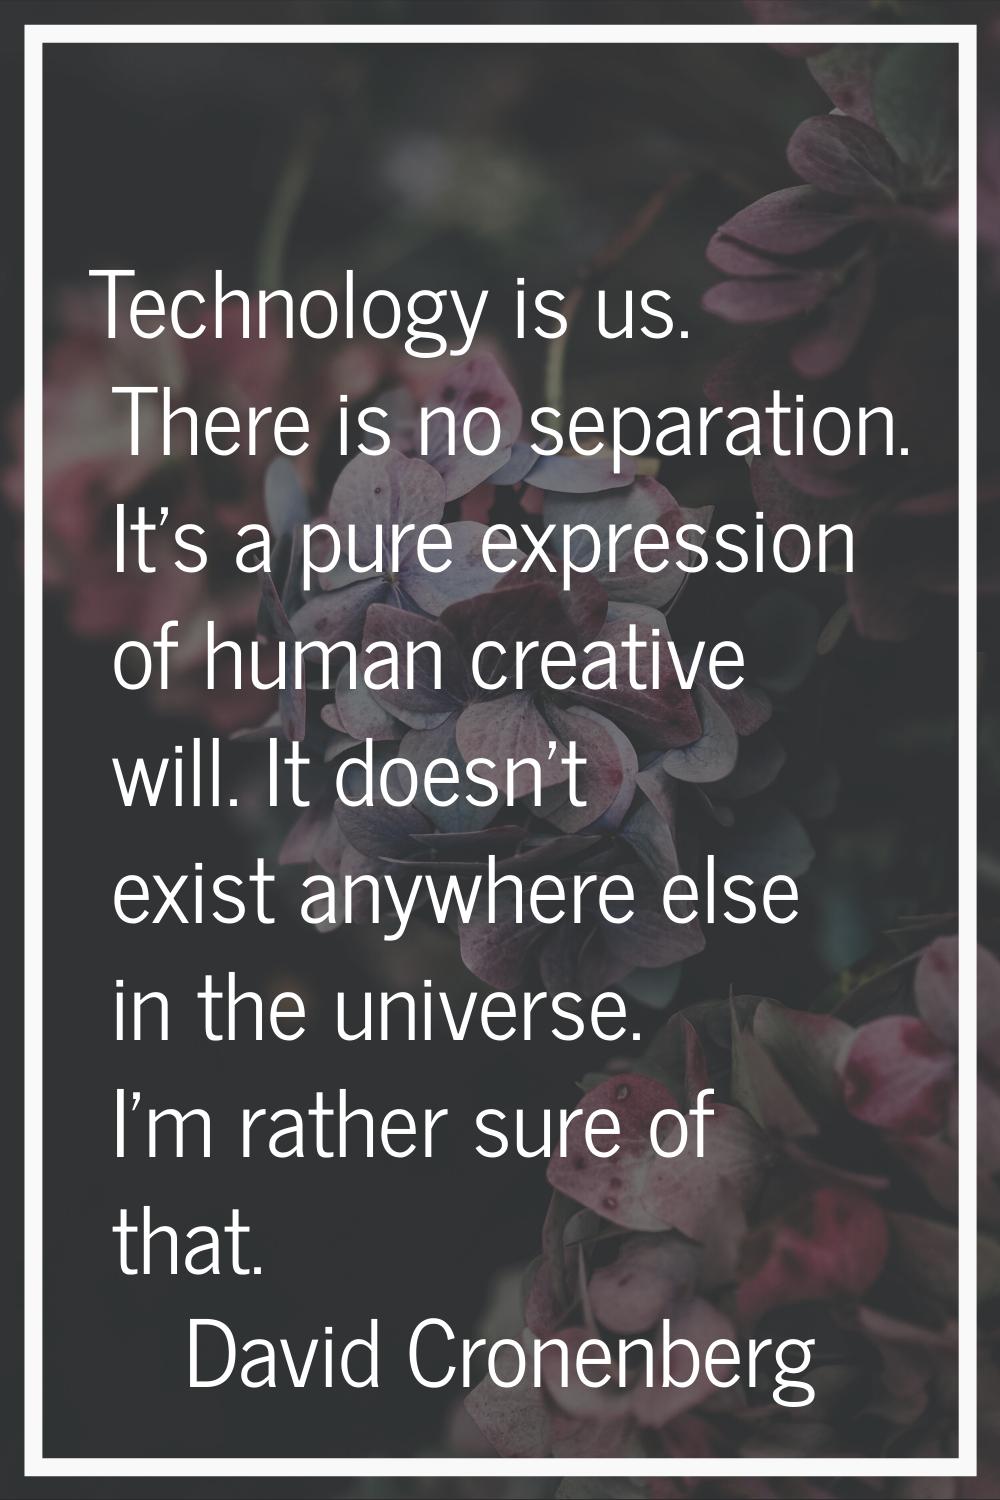 Technology is us. There is no separation. It's a pure expression of human creative will. It doesn't